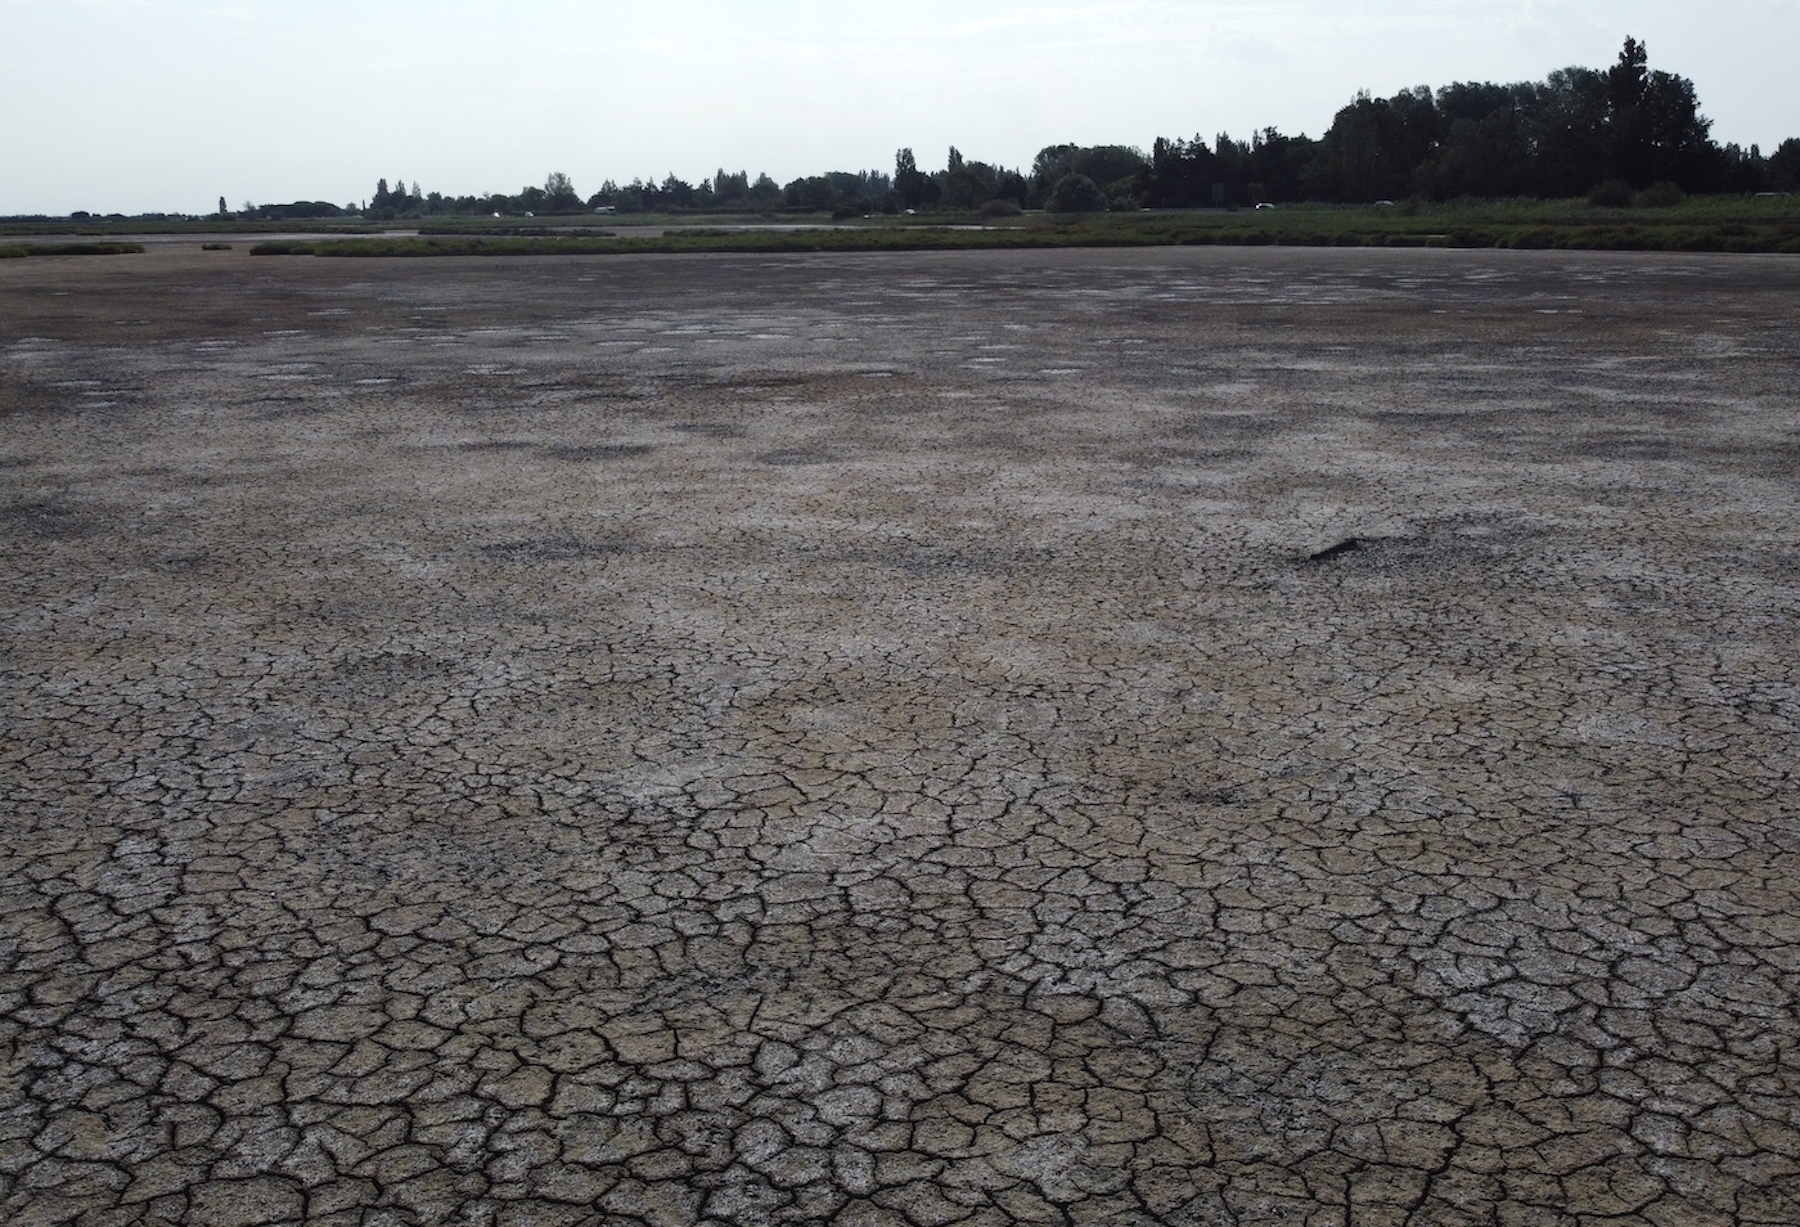 11 Places Around The World That Are In A Drought Right Now